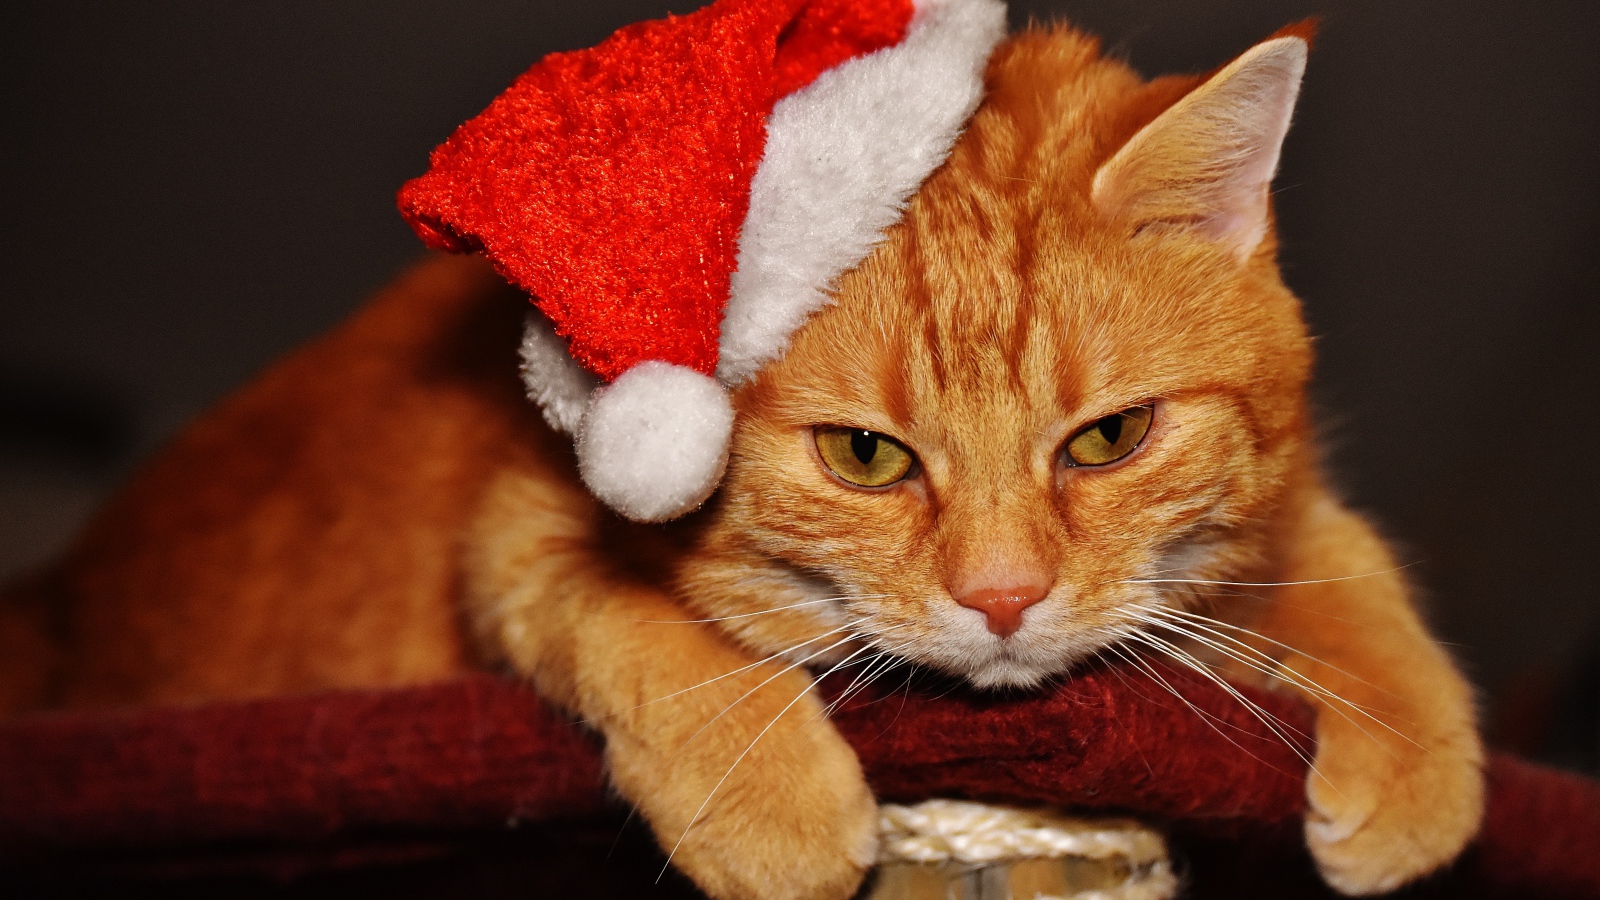 Sad ginger cat in a Christmas hat